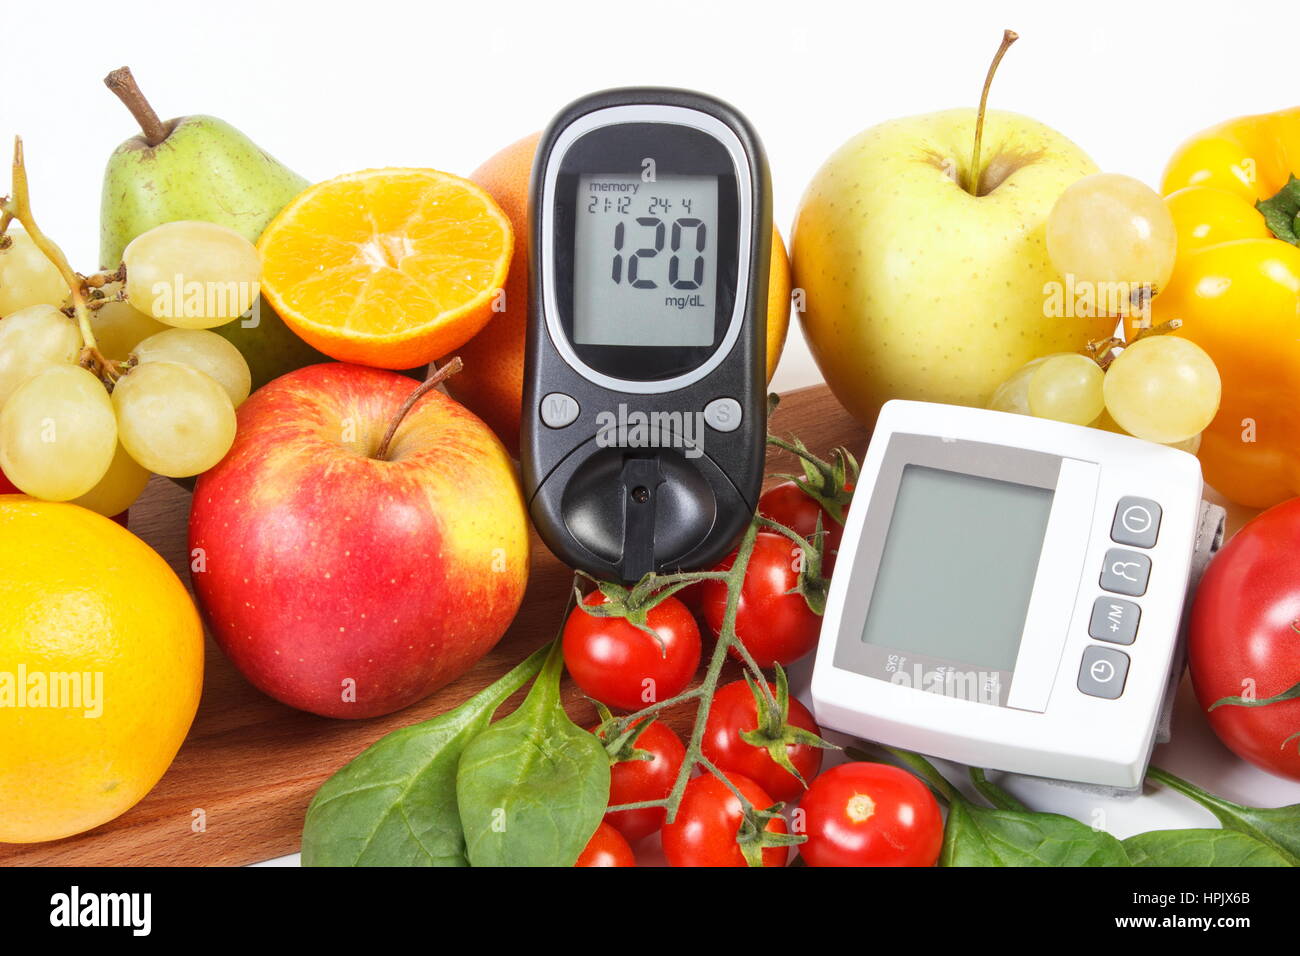 https://c8.alamy.com/comp/HPJX6B/glucose-meter-with-result-of-sugar-level-blood-pressure-monitor-and-HPJX6B.jpg